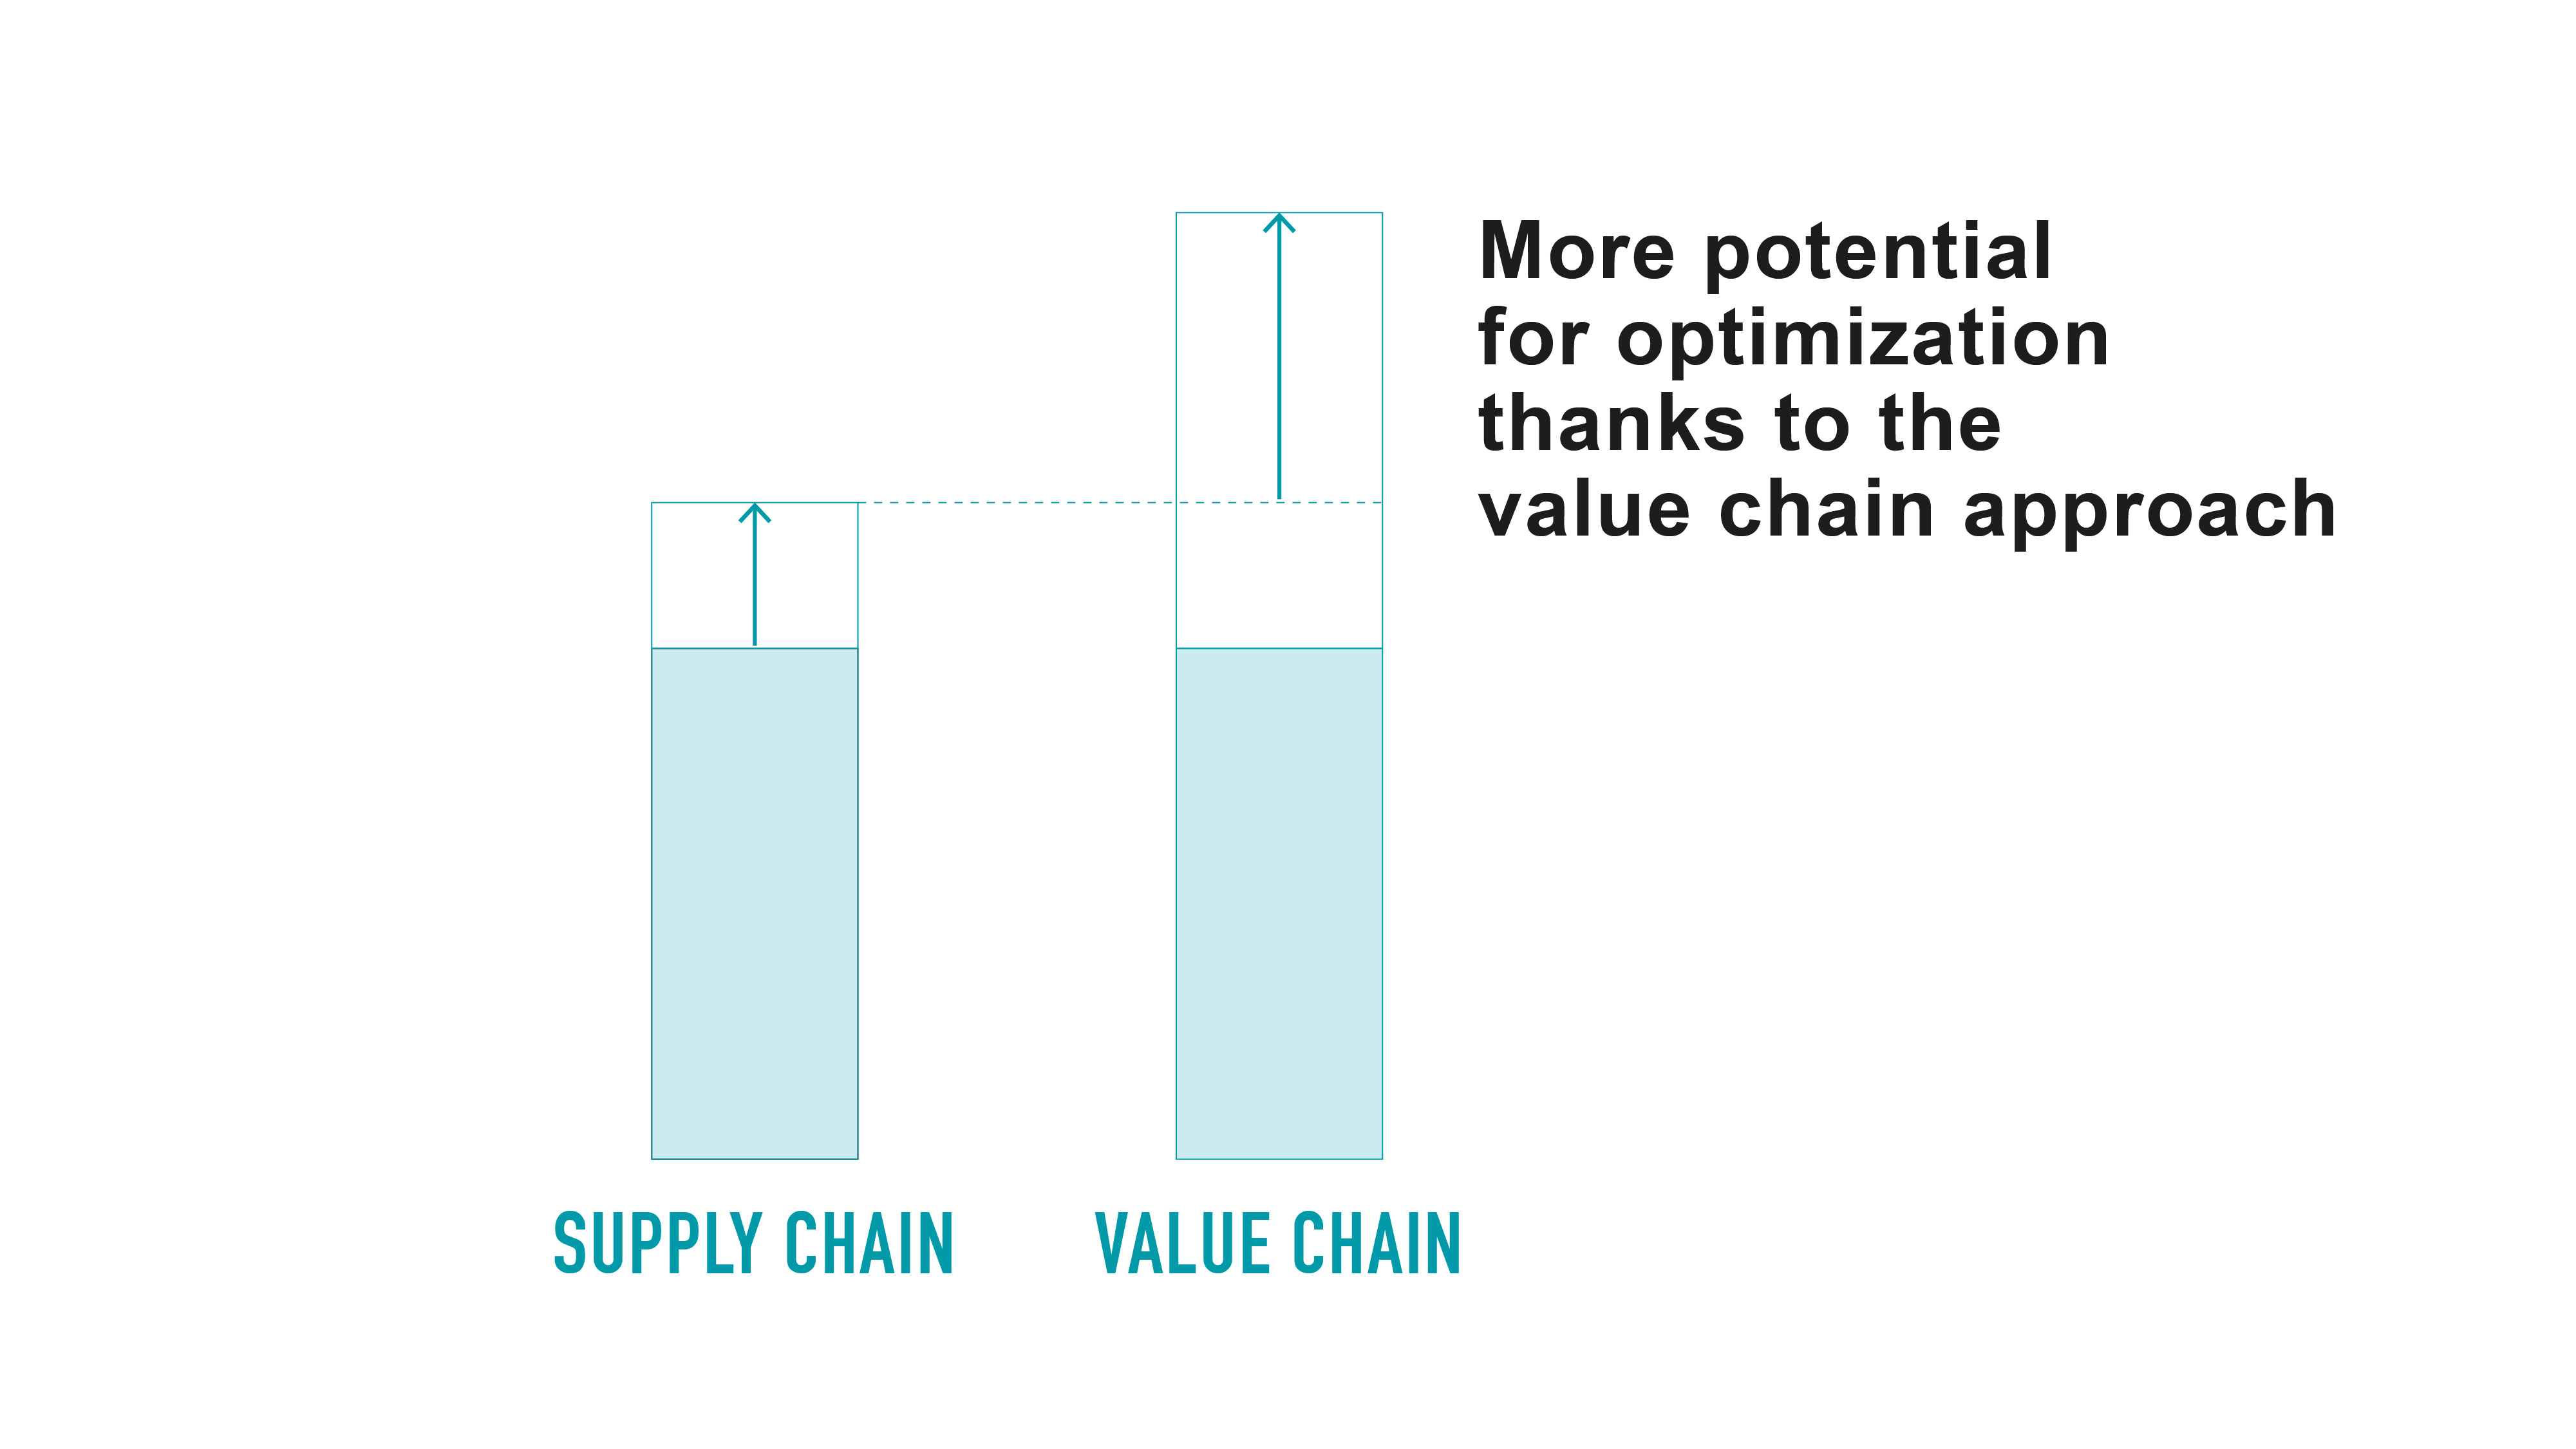 Compared to the supply chain, the value chain has more potential for optimization.